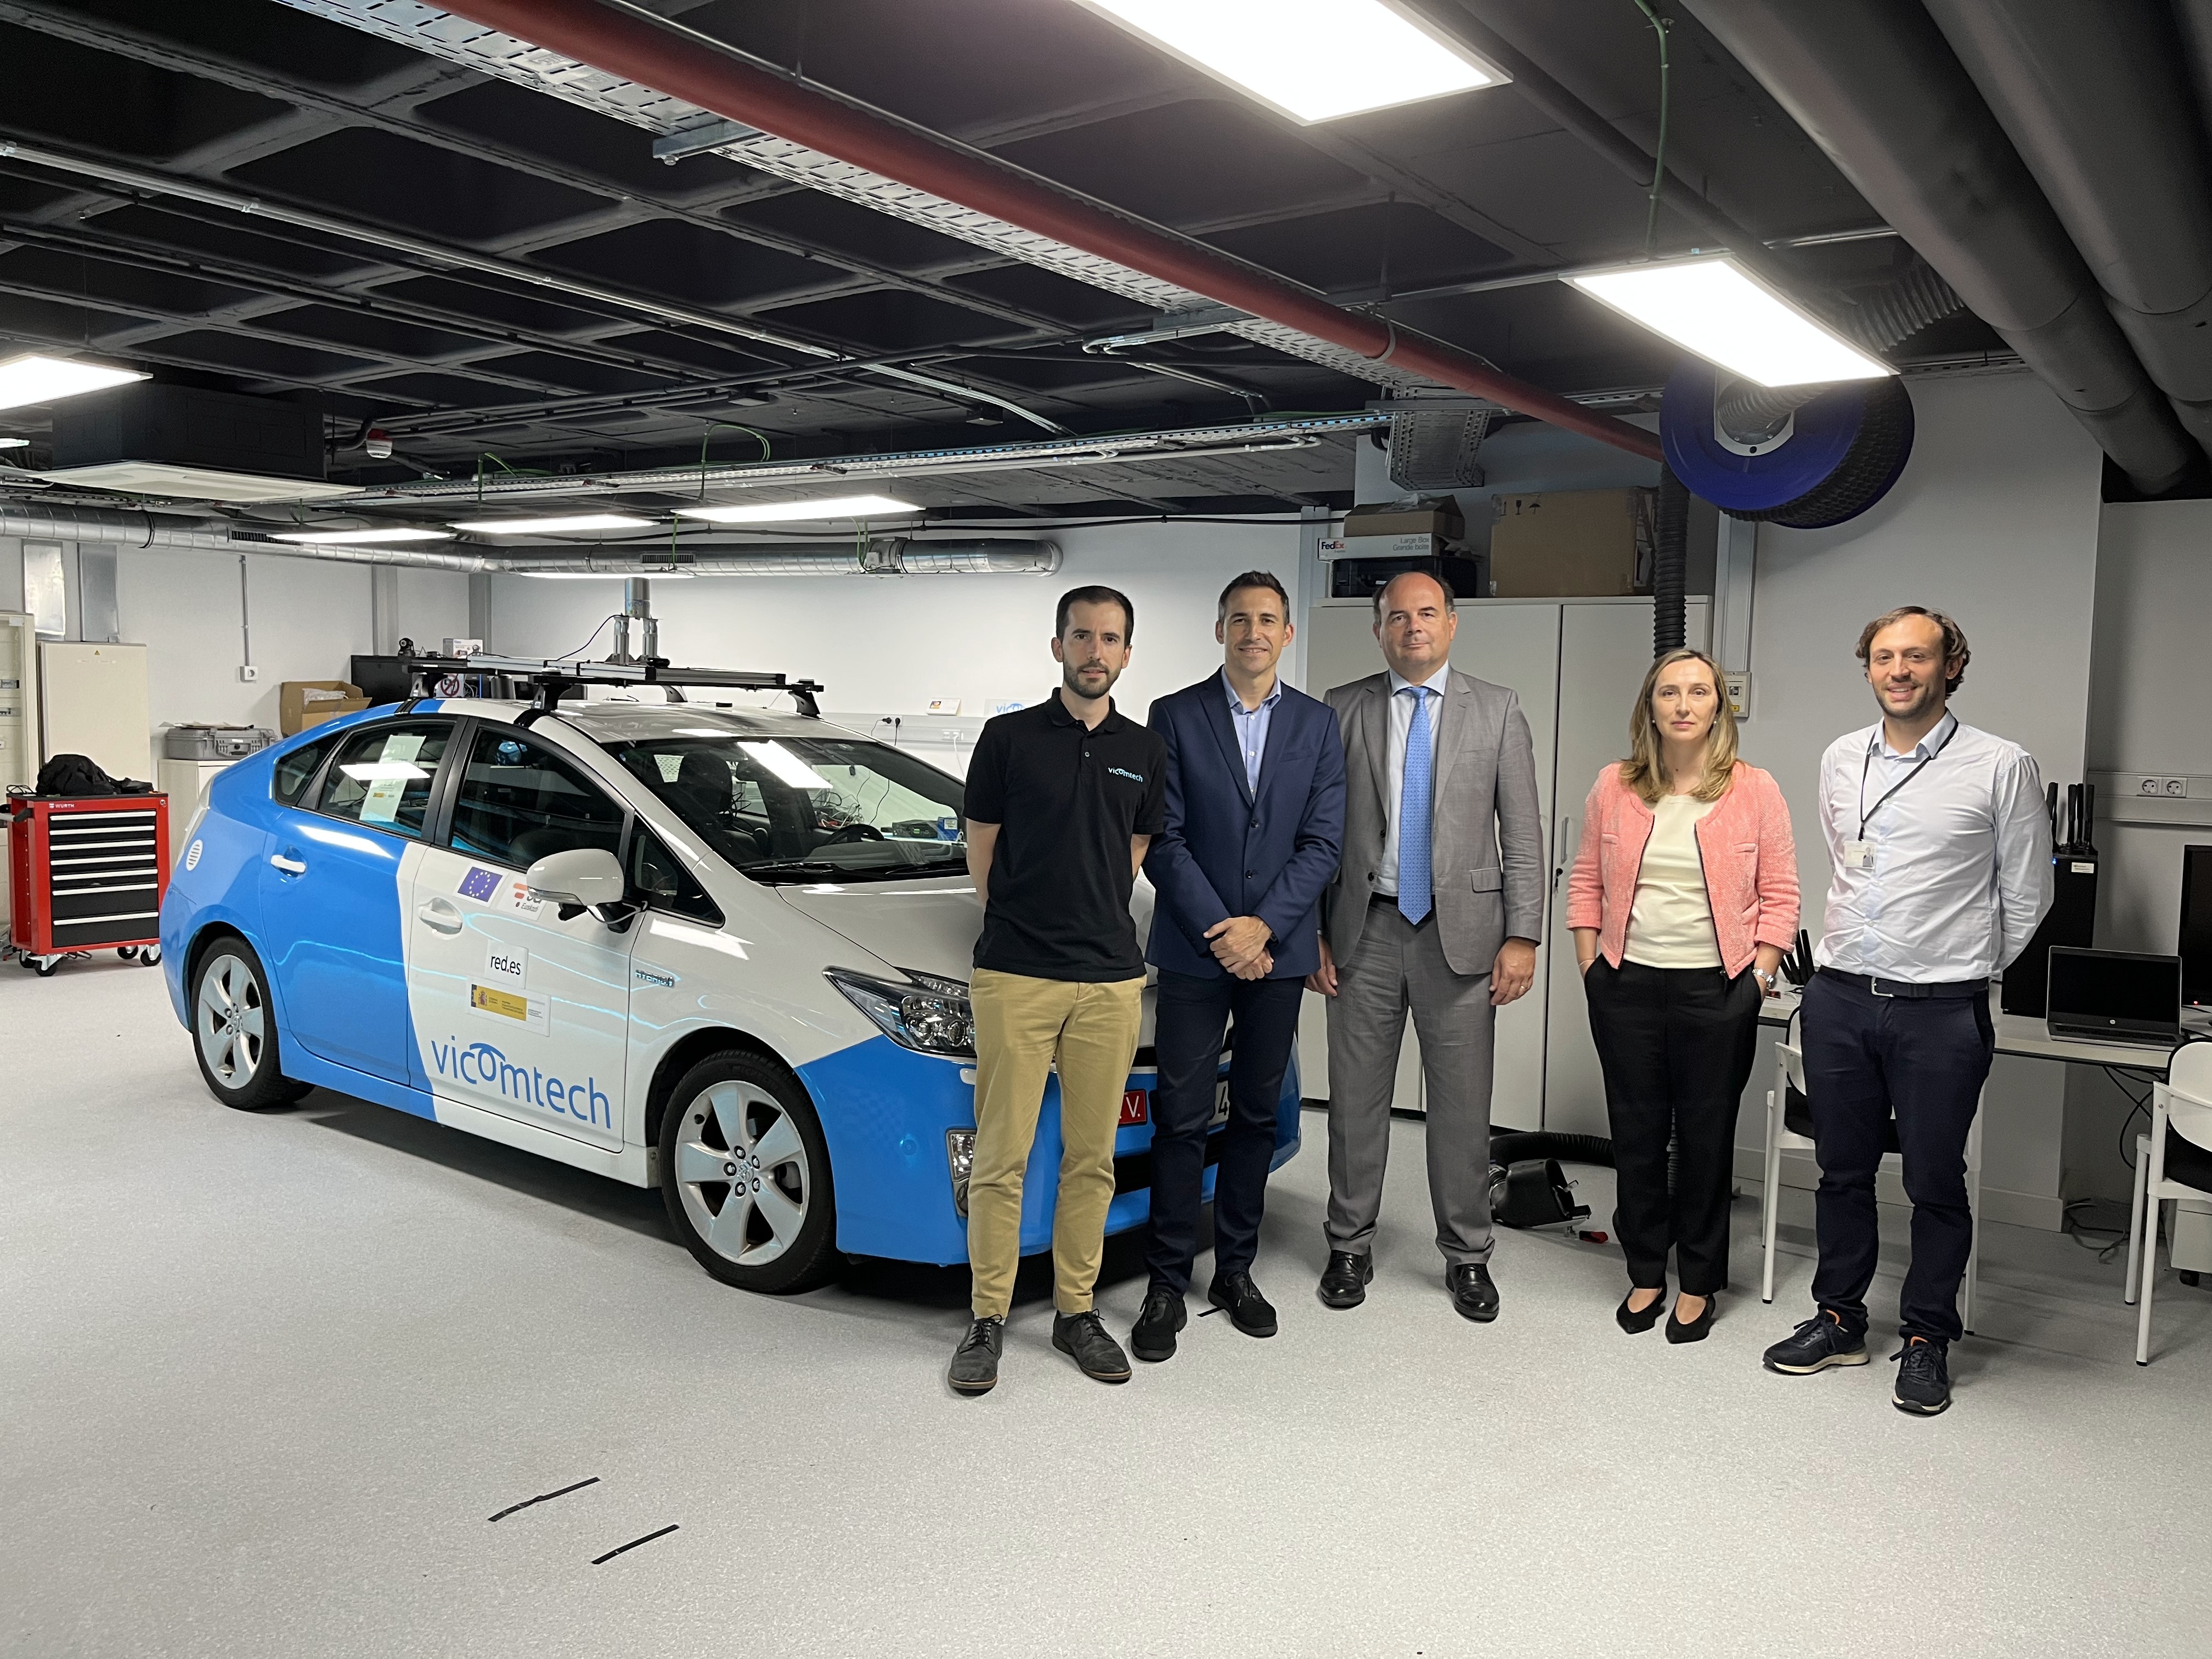 On Wednesday, June 22th, Donostia-San Sebastián hosted the visit of Red.es, an entity of the Ministry of Economic Affairs and Digital Transformation